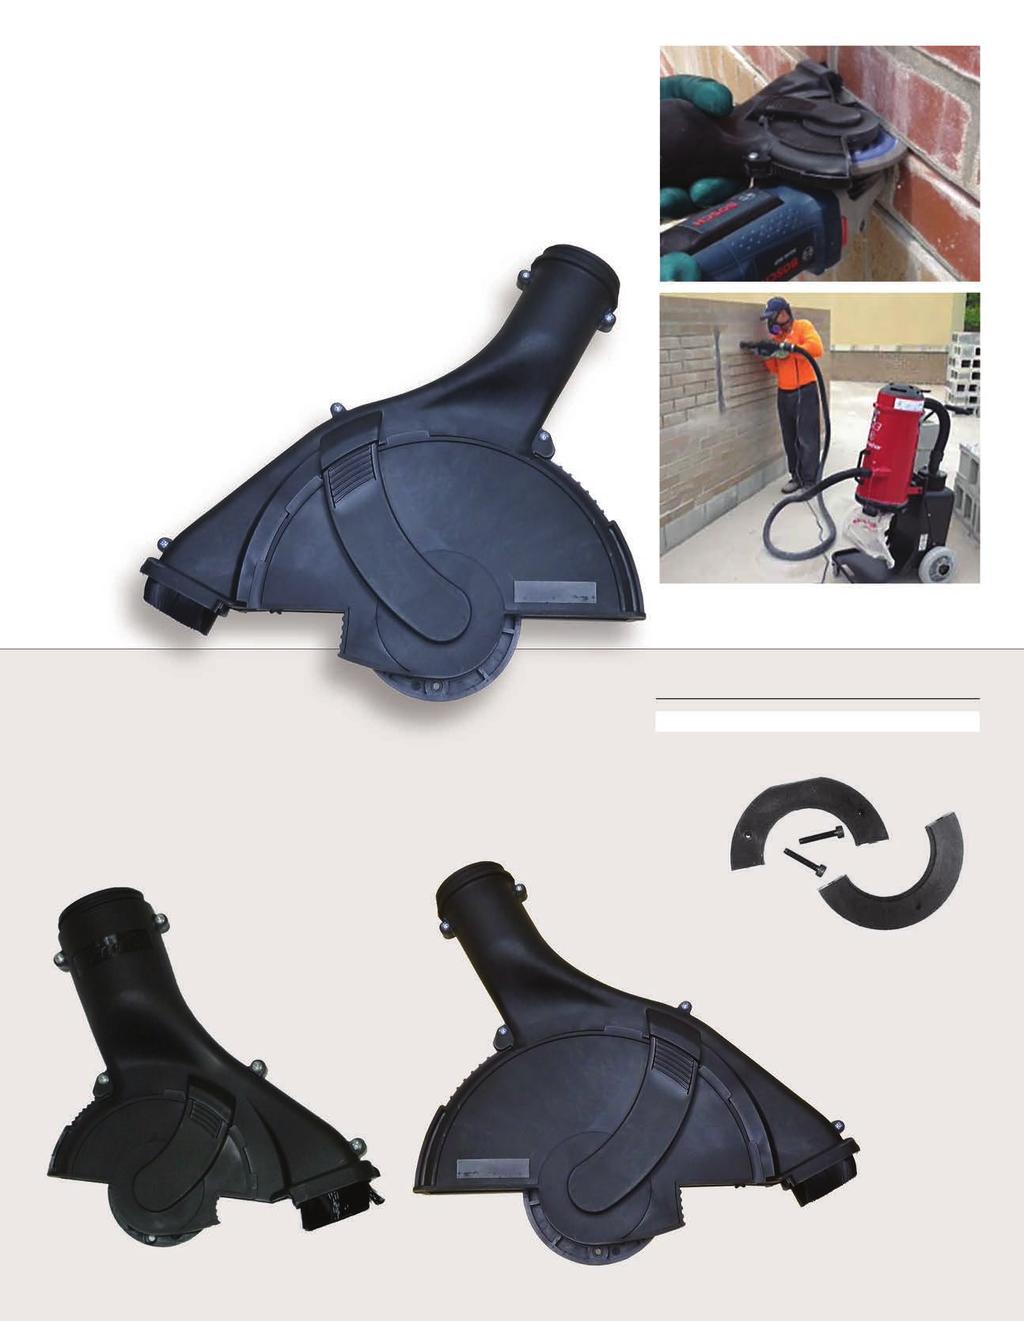 Dust Hoods Pullman-Ermator s patented Dust Hoods are designed for capturing dust when cutting with an angle grinder. Most commonly used in the masonry and concrete industries.